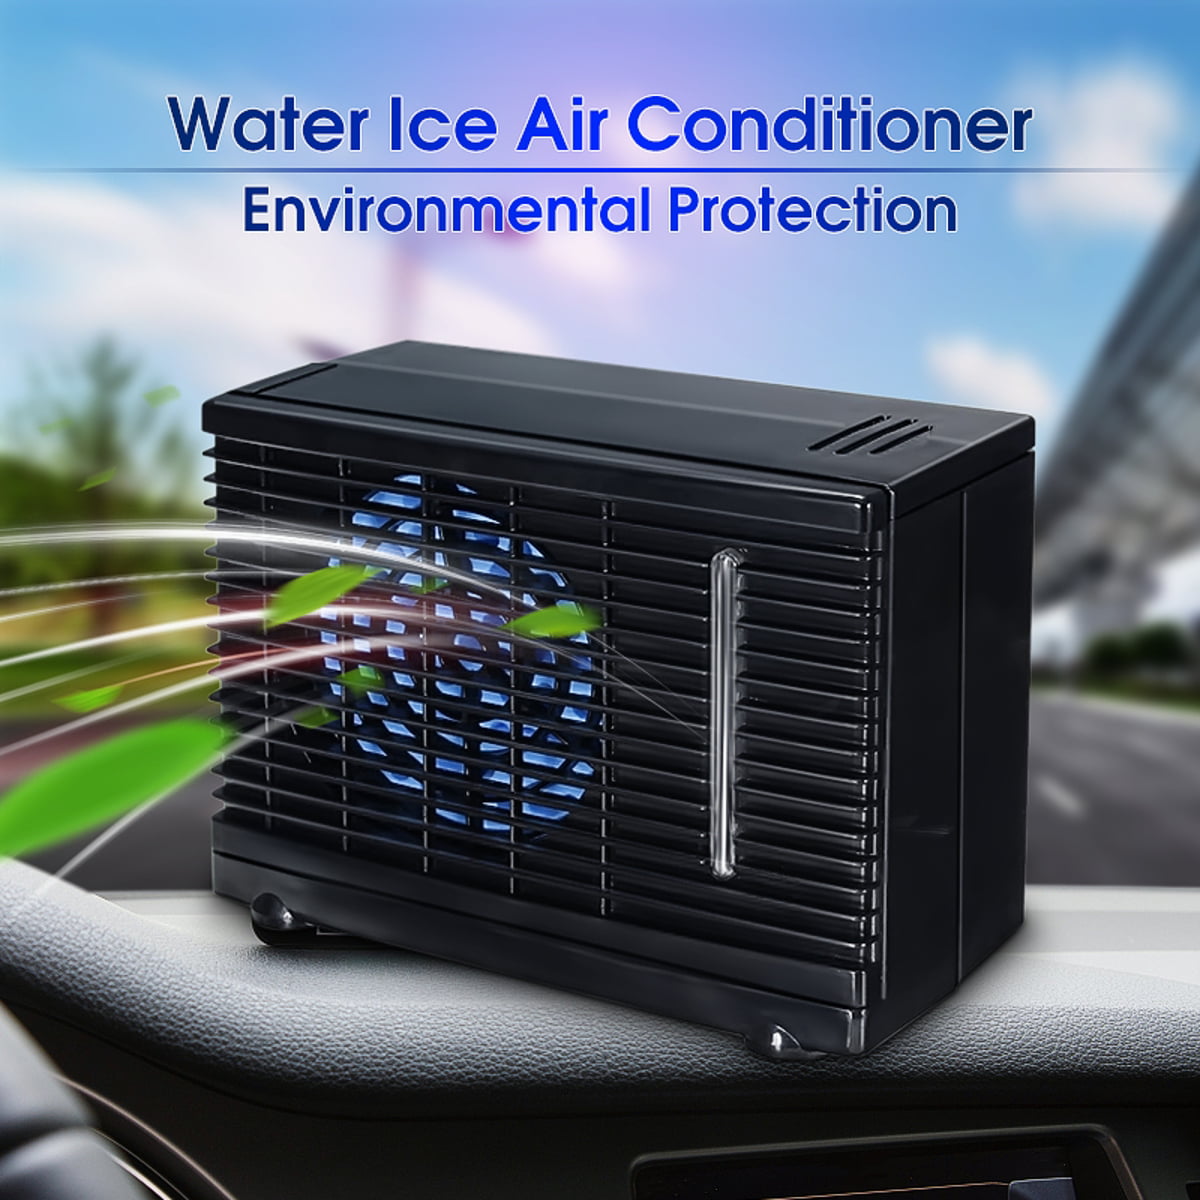 12V 3A Portable Home Car Cooler Cooling Fan Evaporative Air Conditioner US Stock 